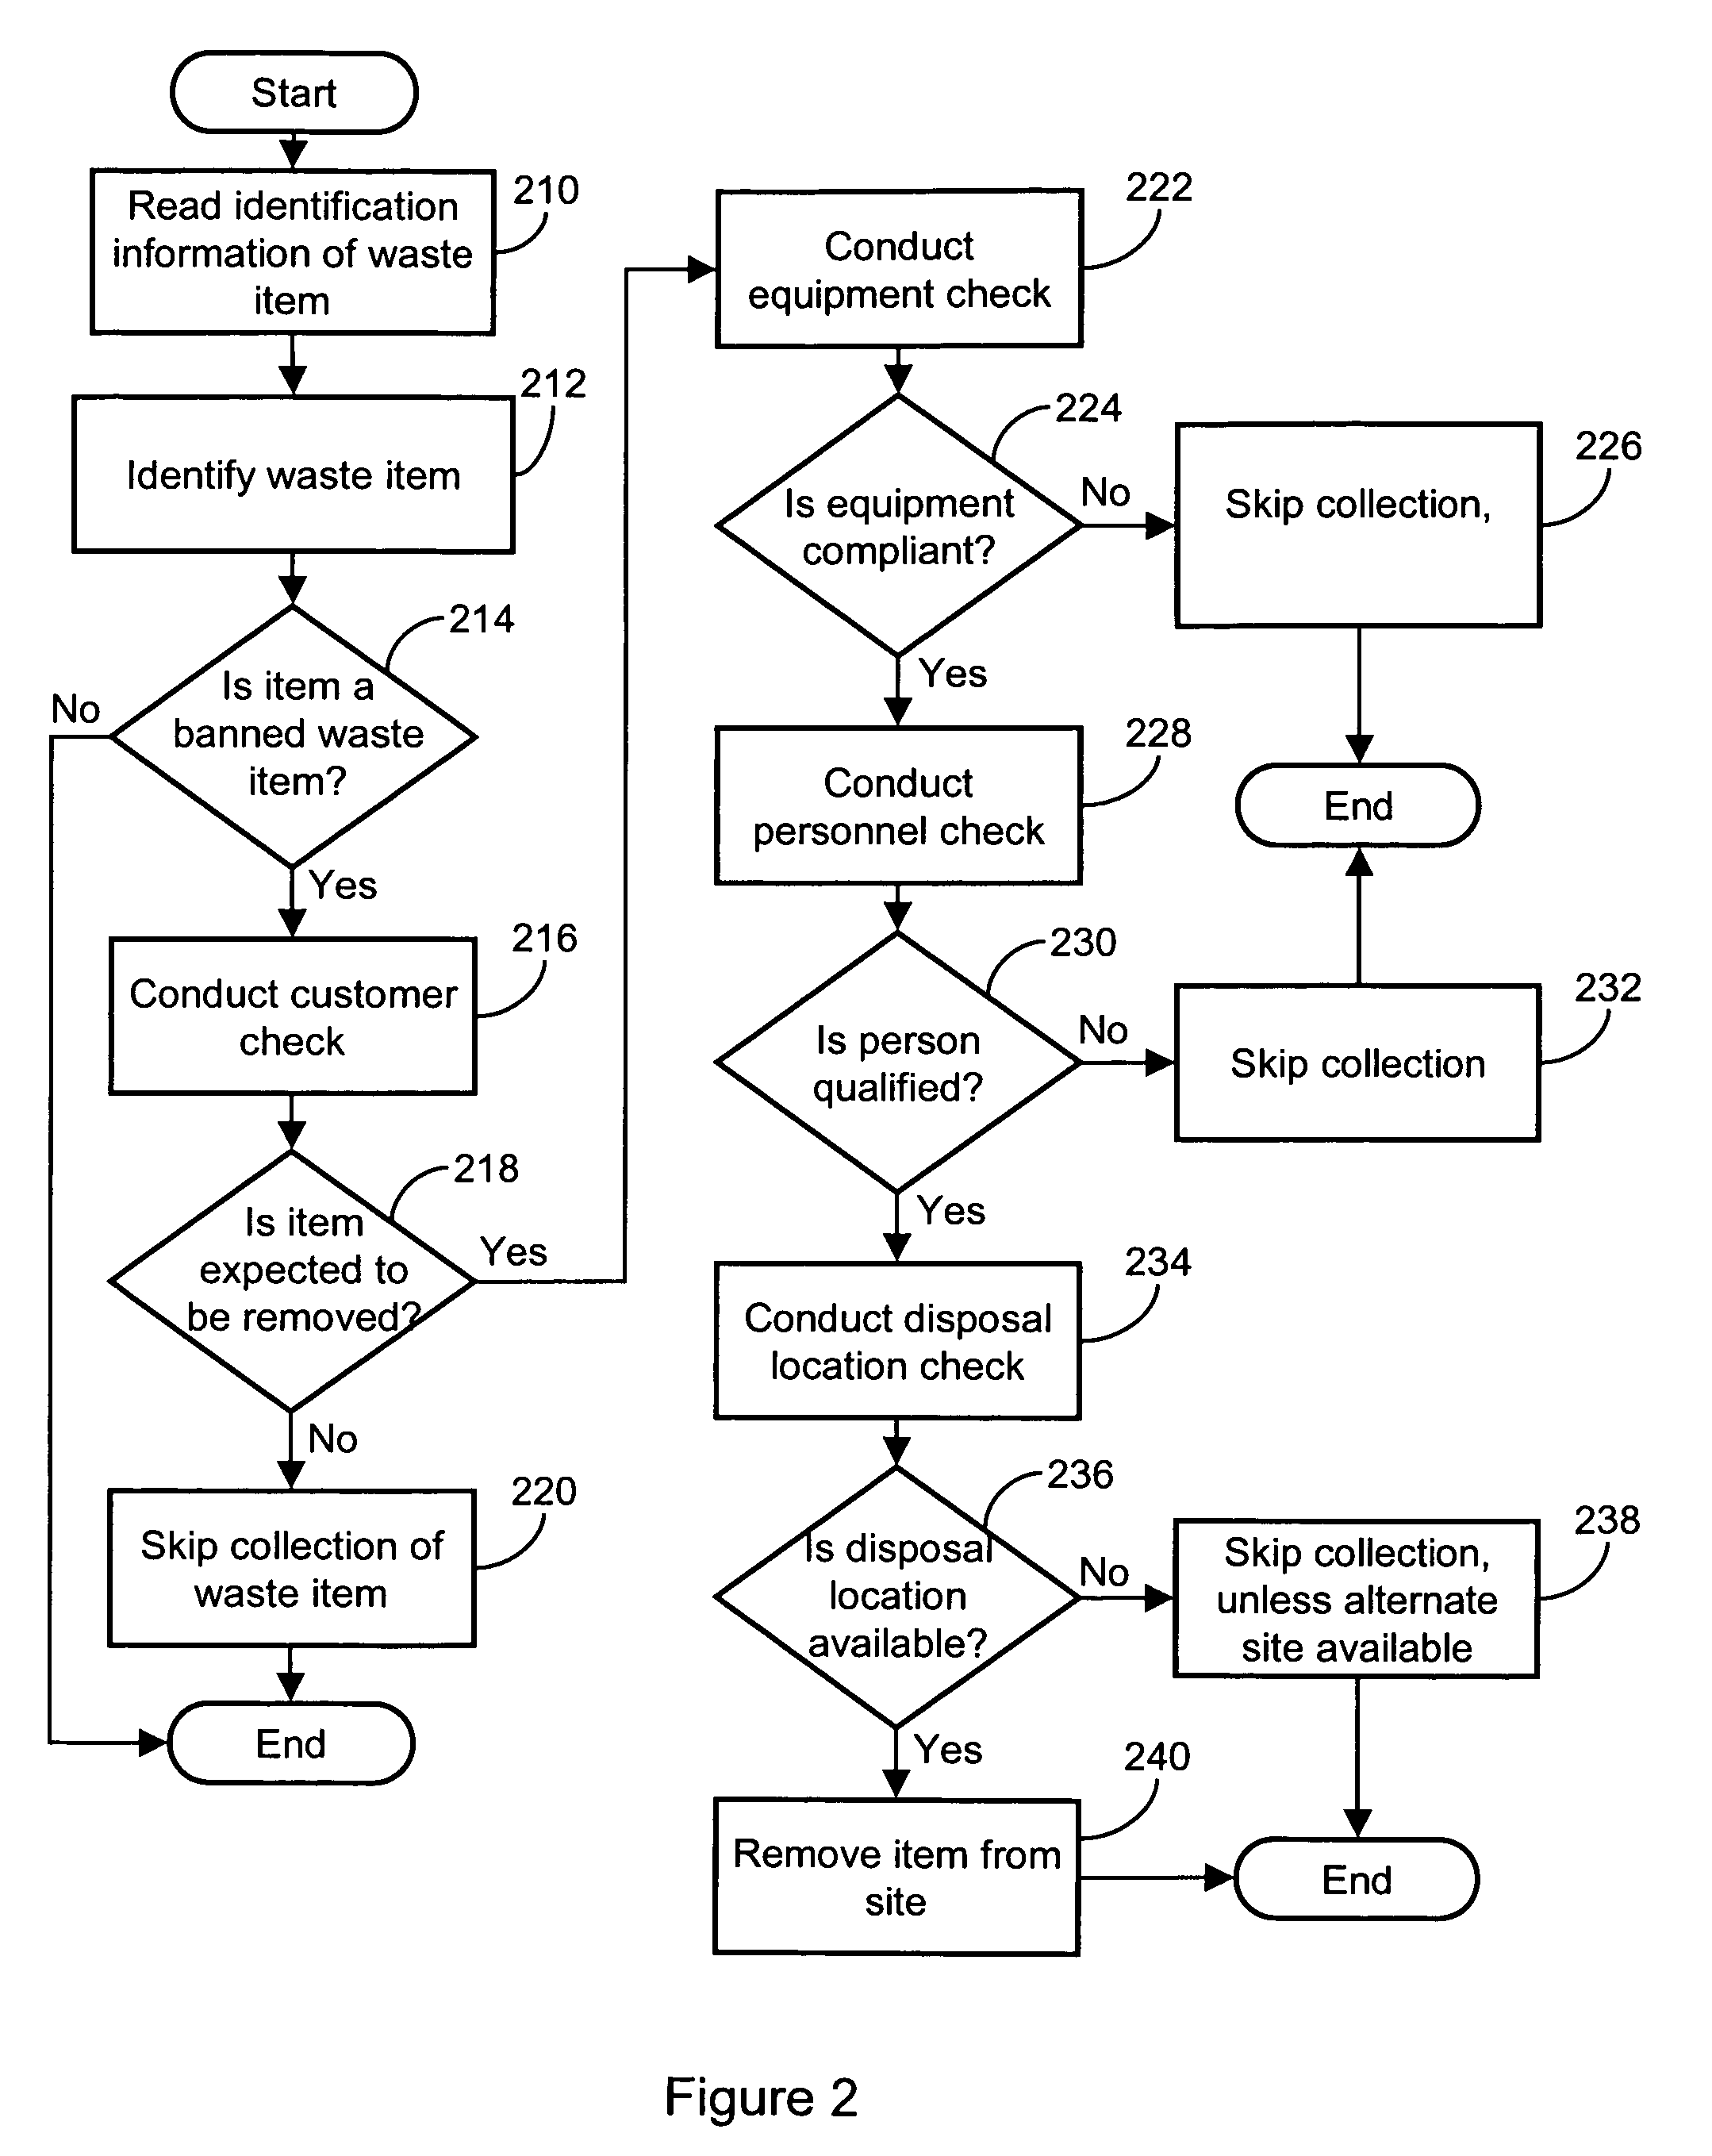 Systems and methods for identifying and collecting banned waste